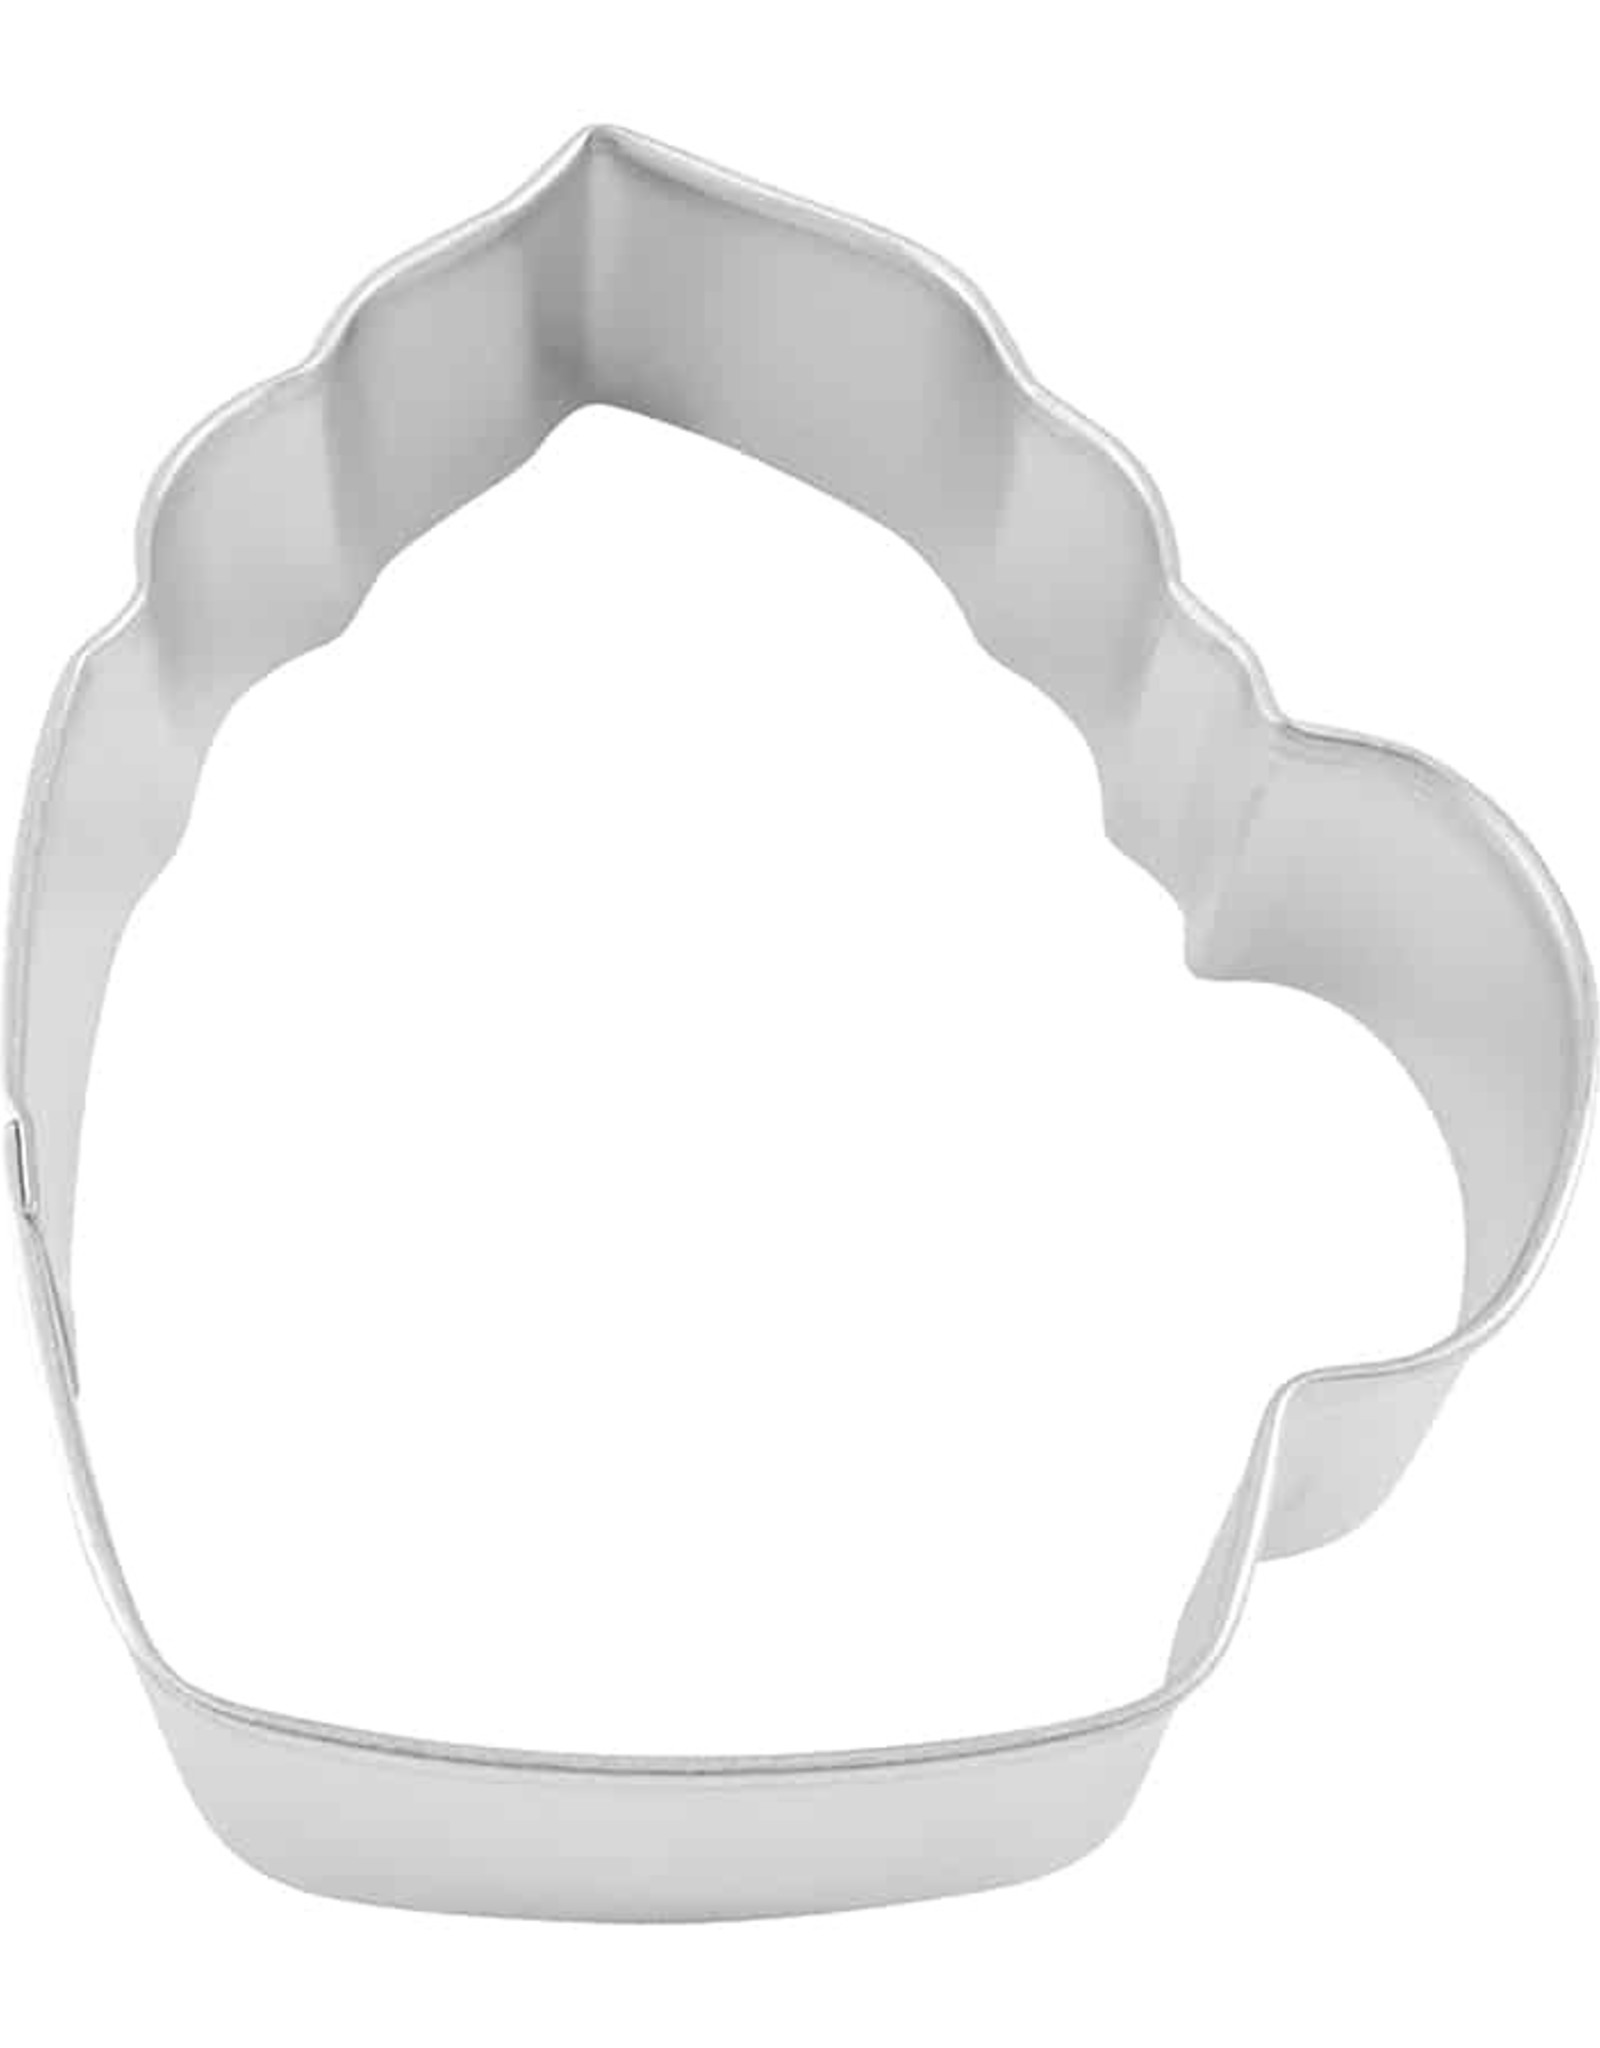 Frothy Mug Cookie Cutter